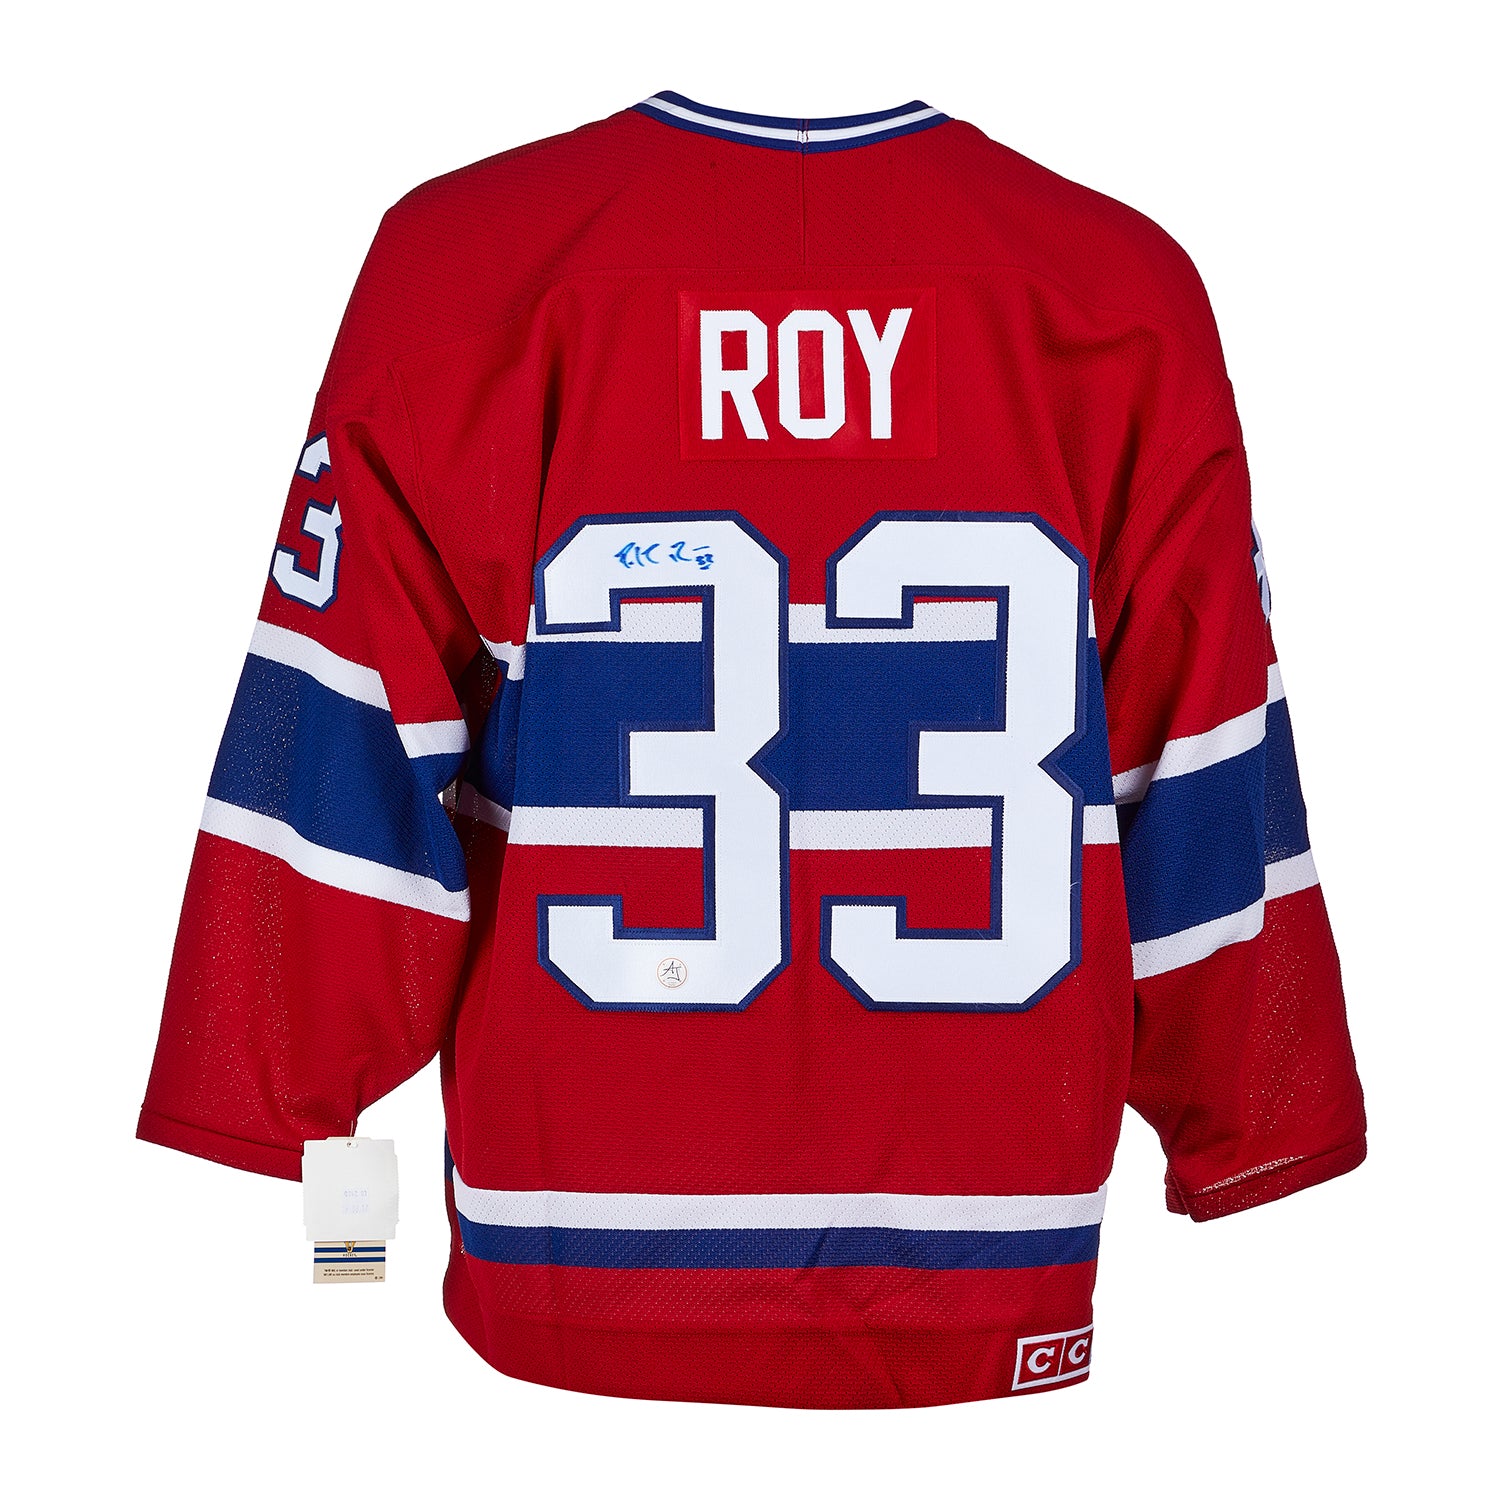 PATRICK ROY MONTREAL CANADIENS CCM AUTHENTIC 1993 STANLEY CUP JERSEY 48 Exc.